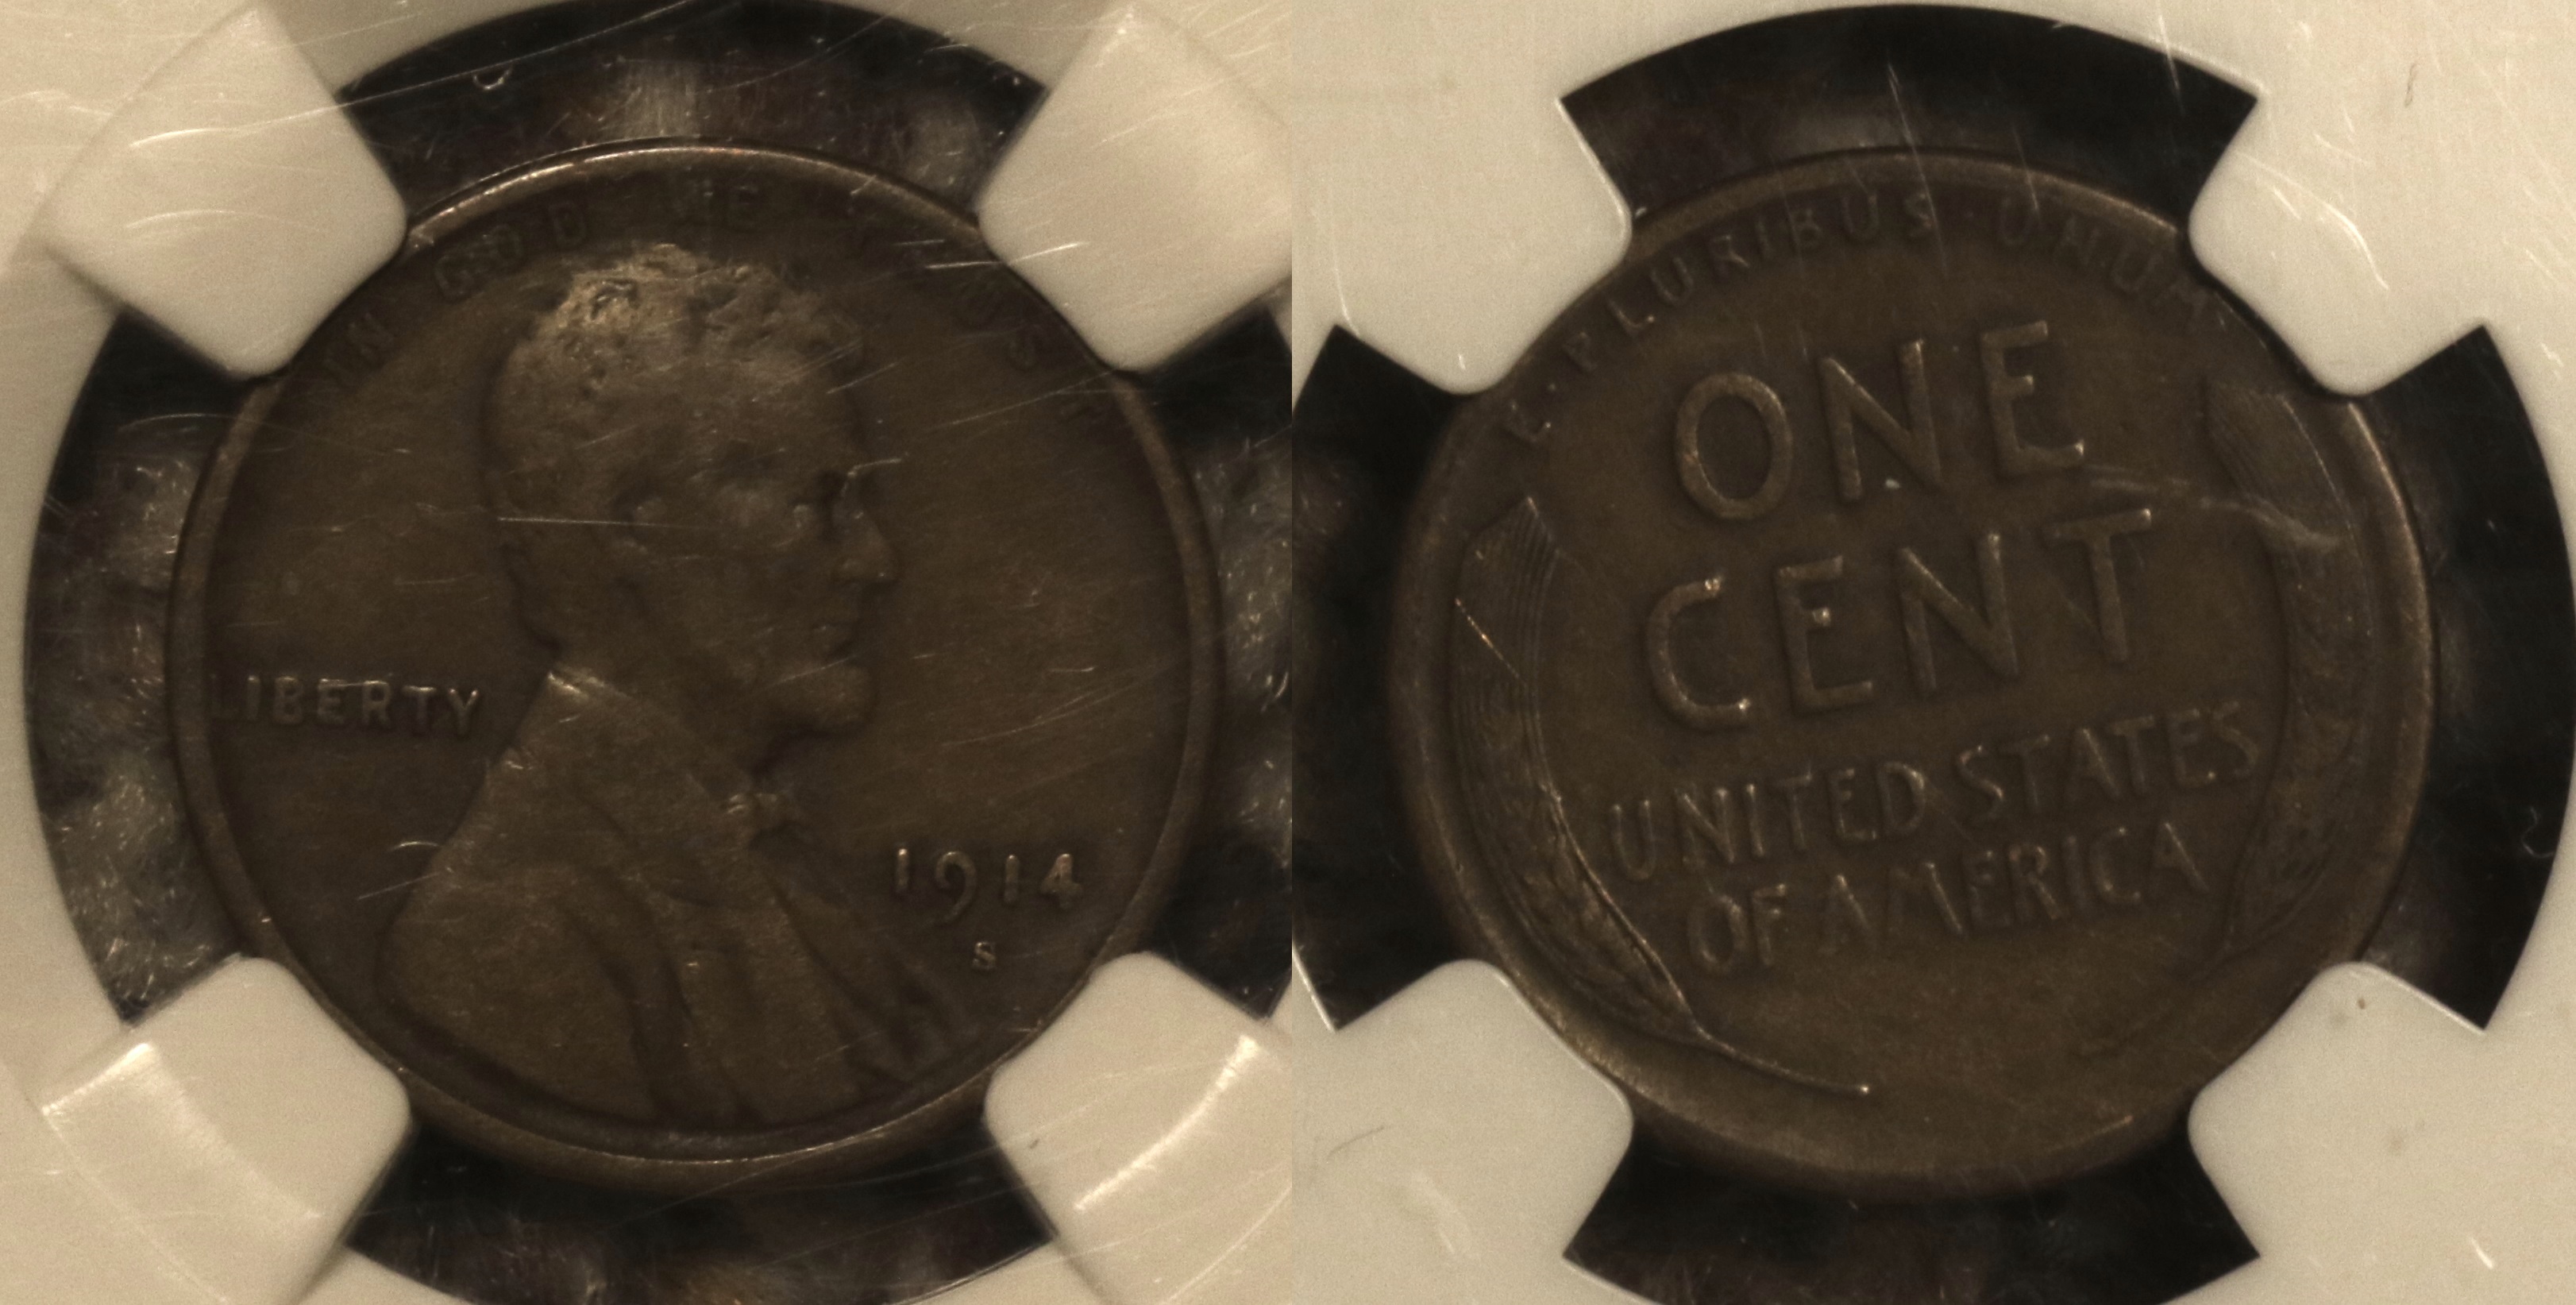 1914-S Lincoln Cent NGC VF-30 camera